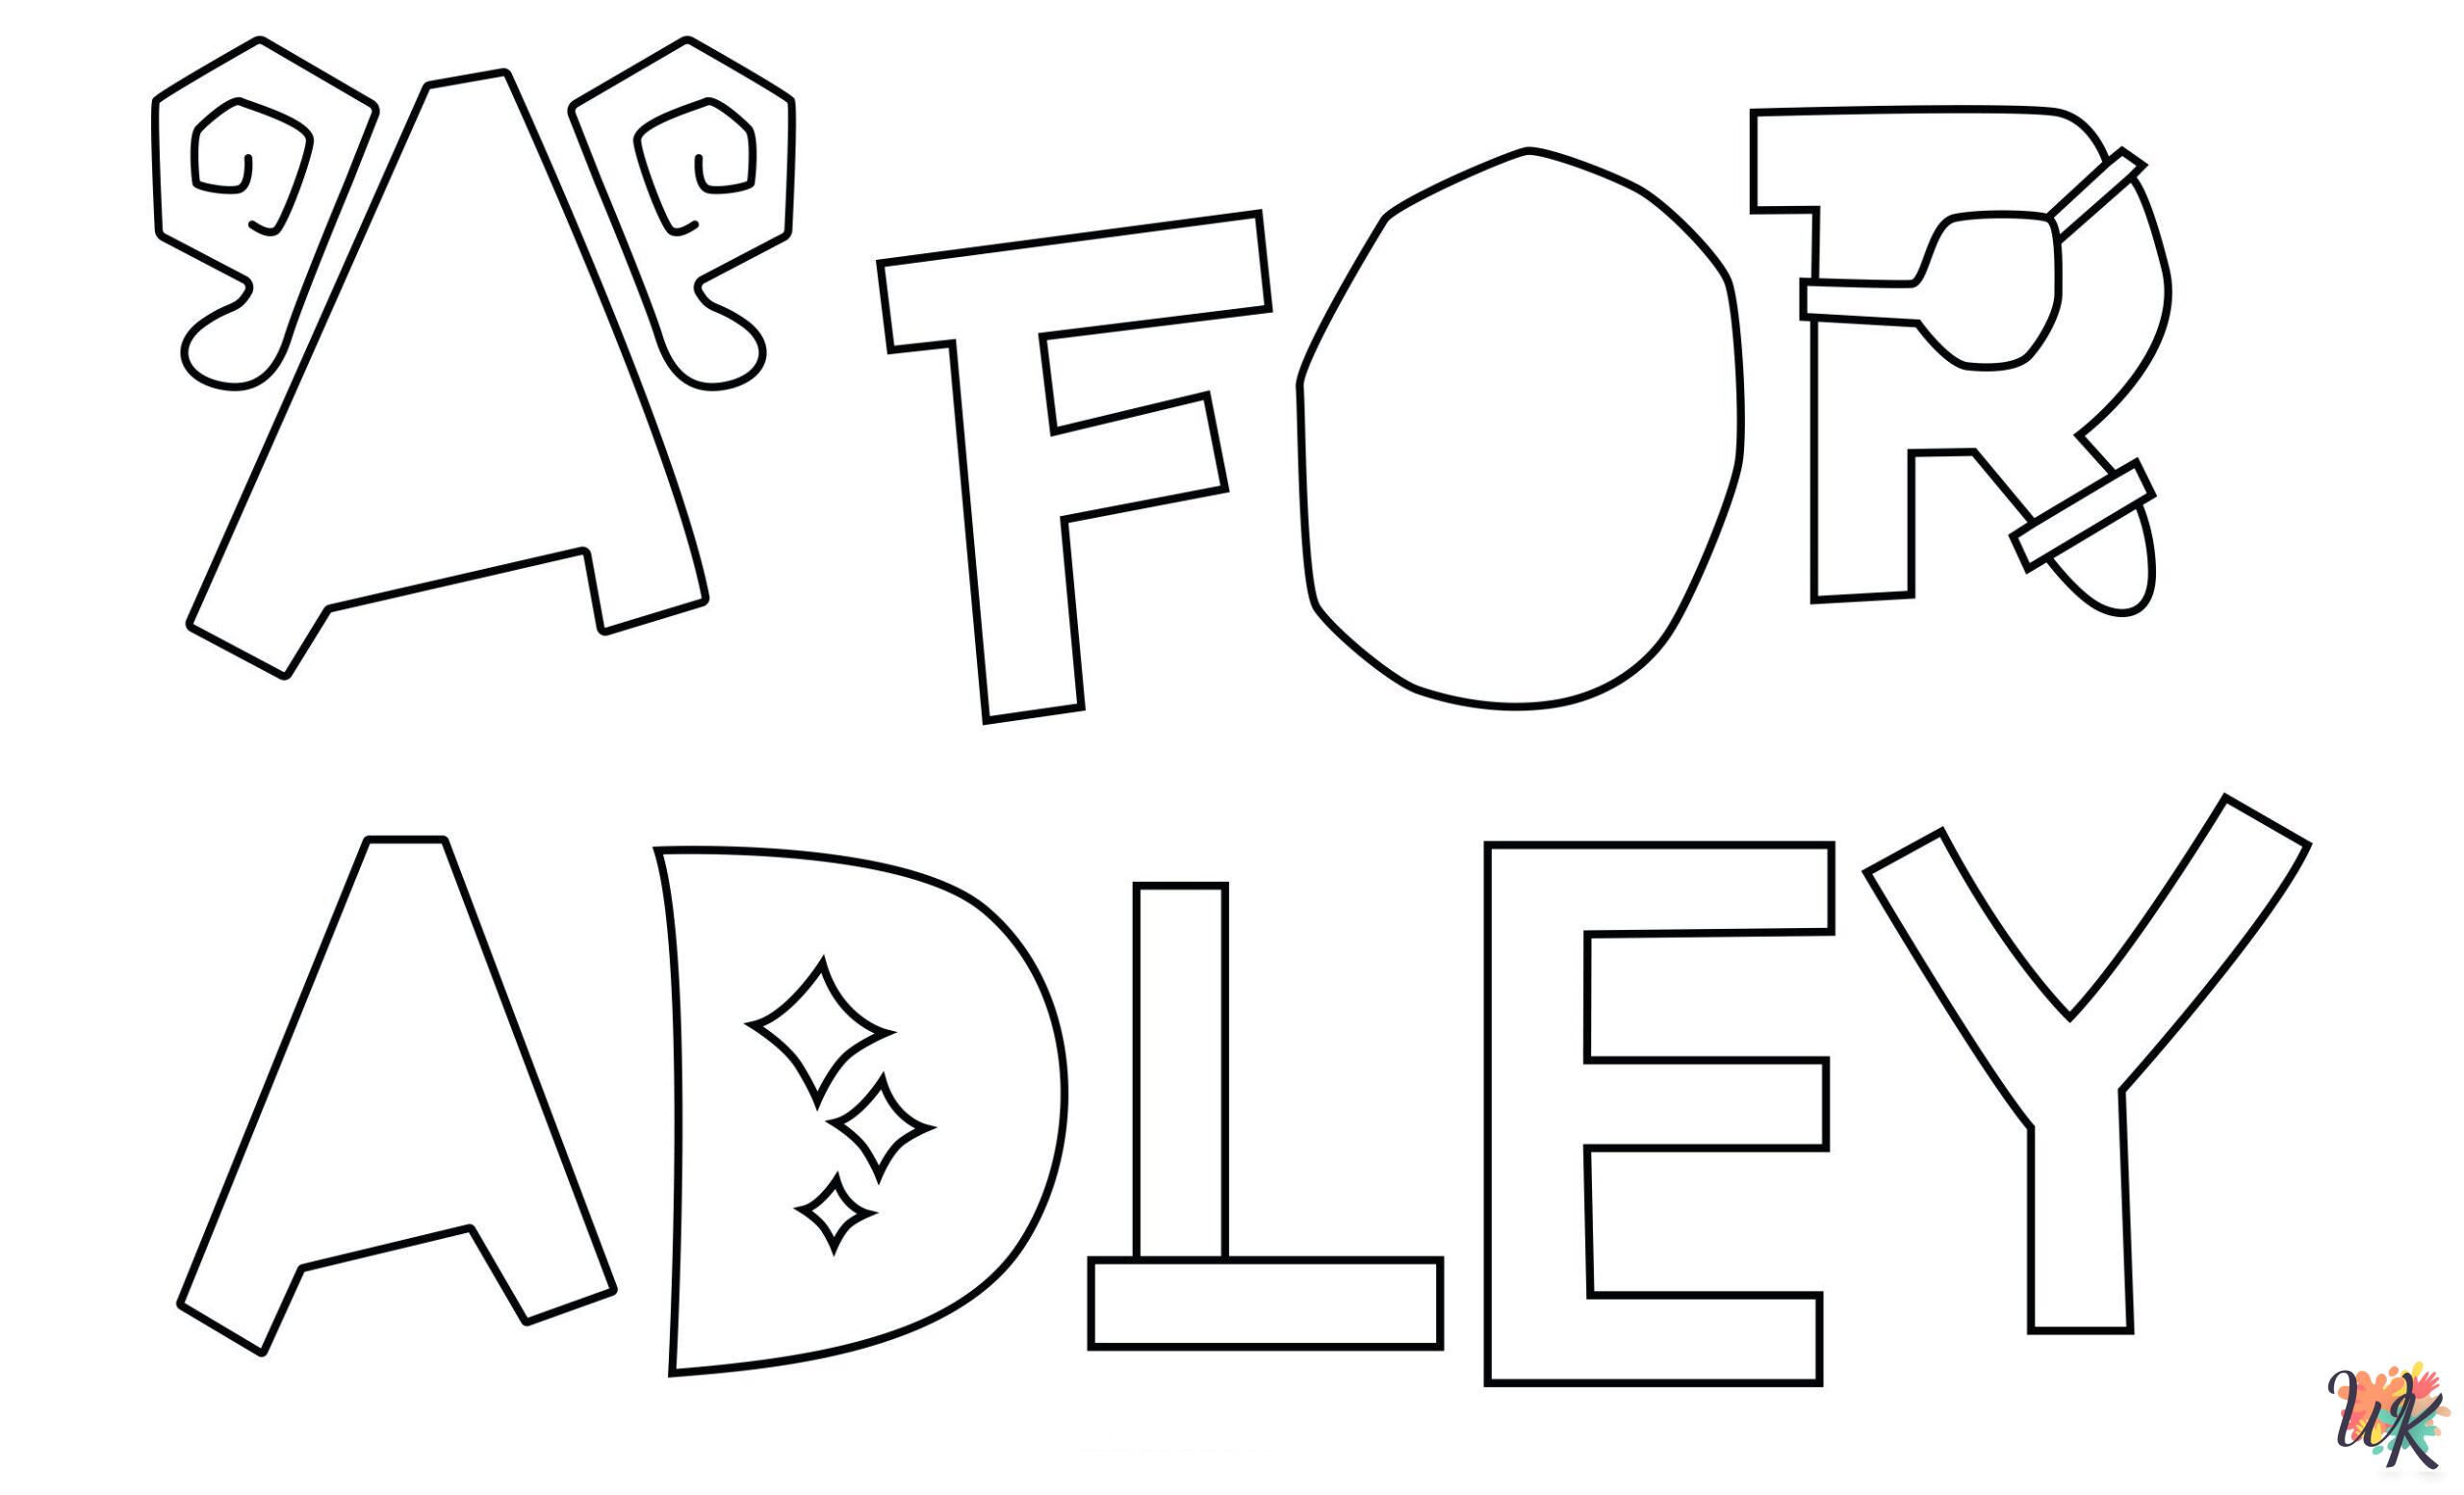 A For Adley themed coloring pages